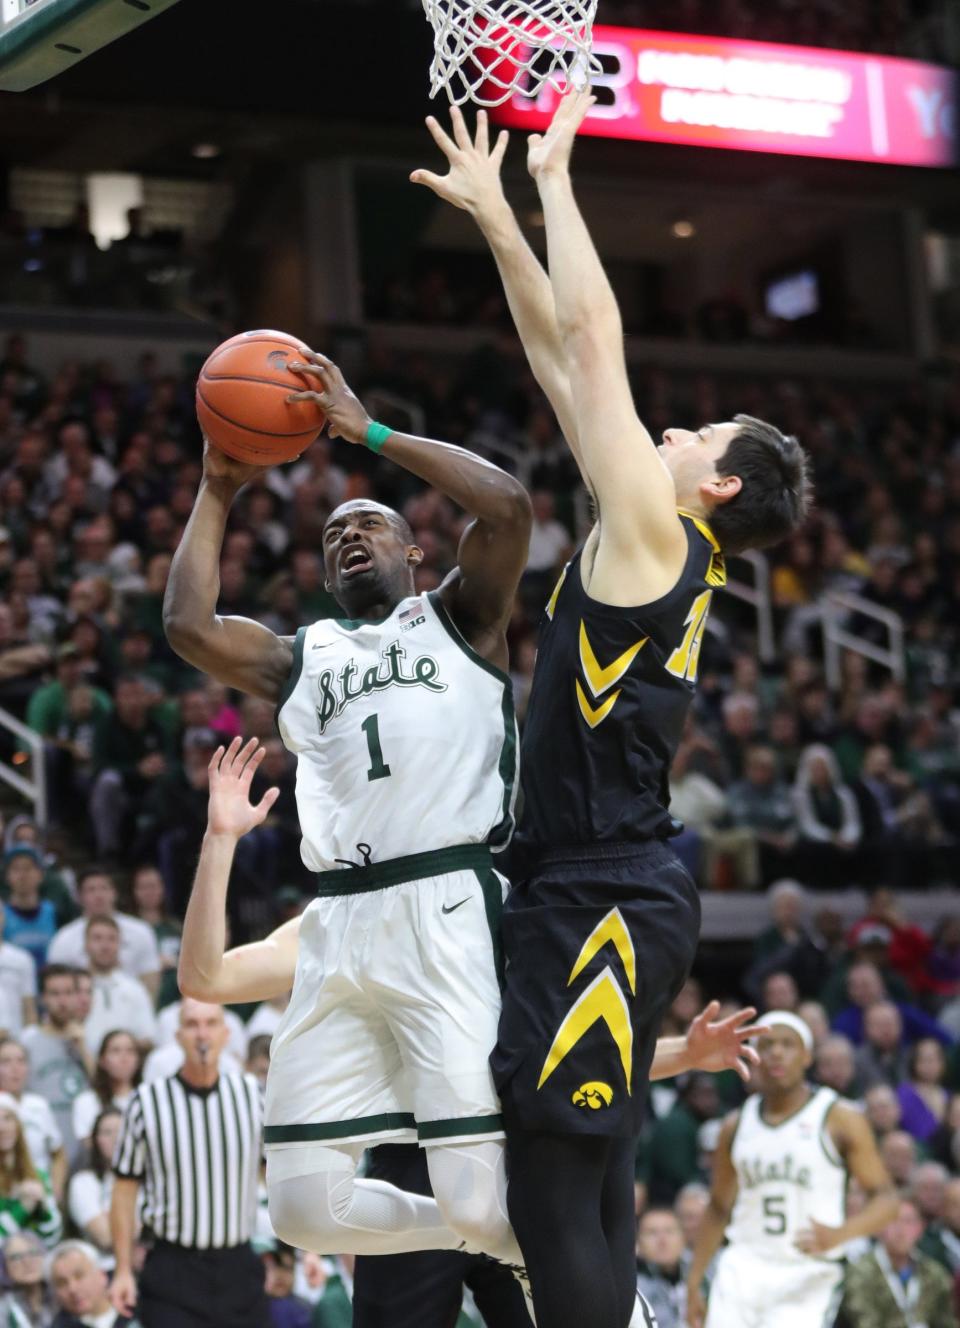 Michigan State guard Joshua Langford scores against Iowa guard Joe Wieskamp during first half action Monday, December 3, 2018 at the Breslin Center in East Lansing, Mich.